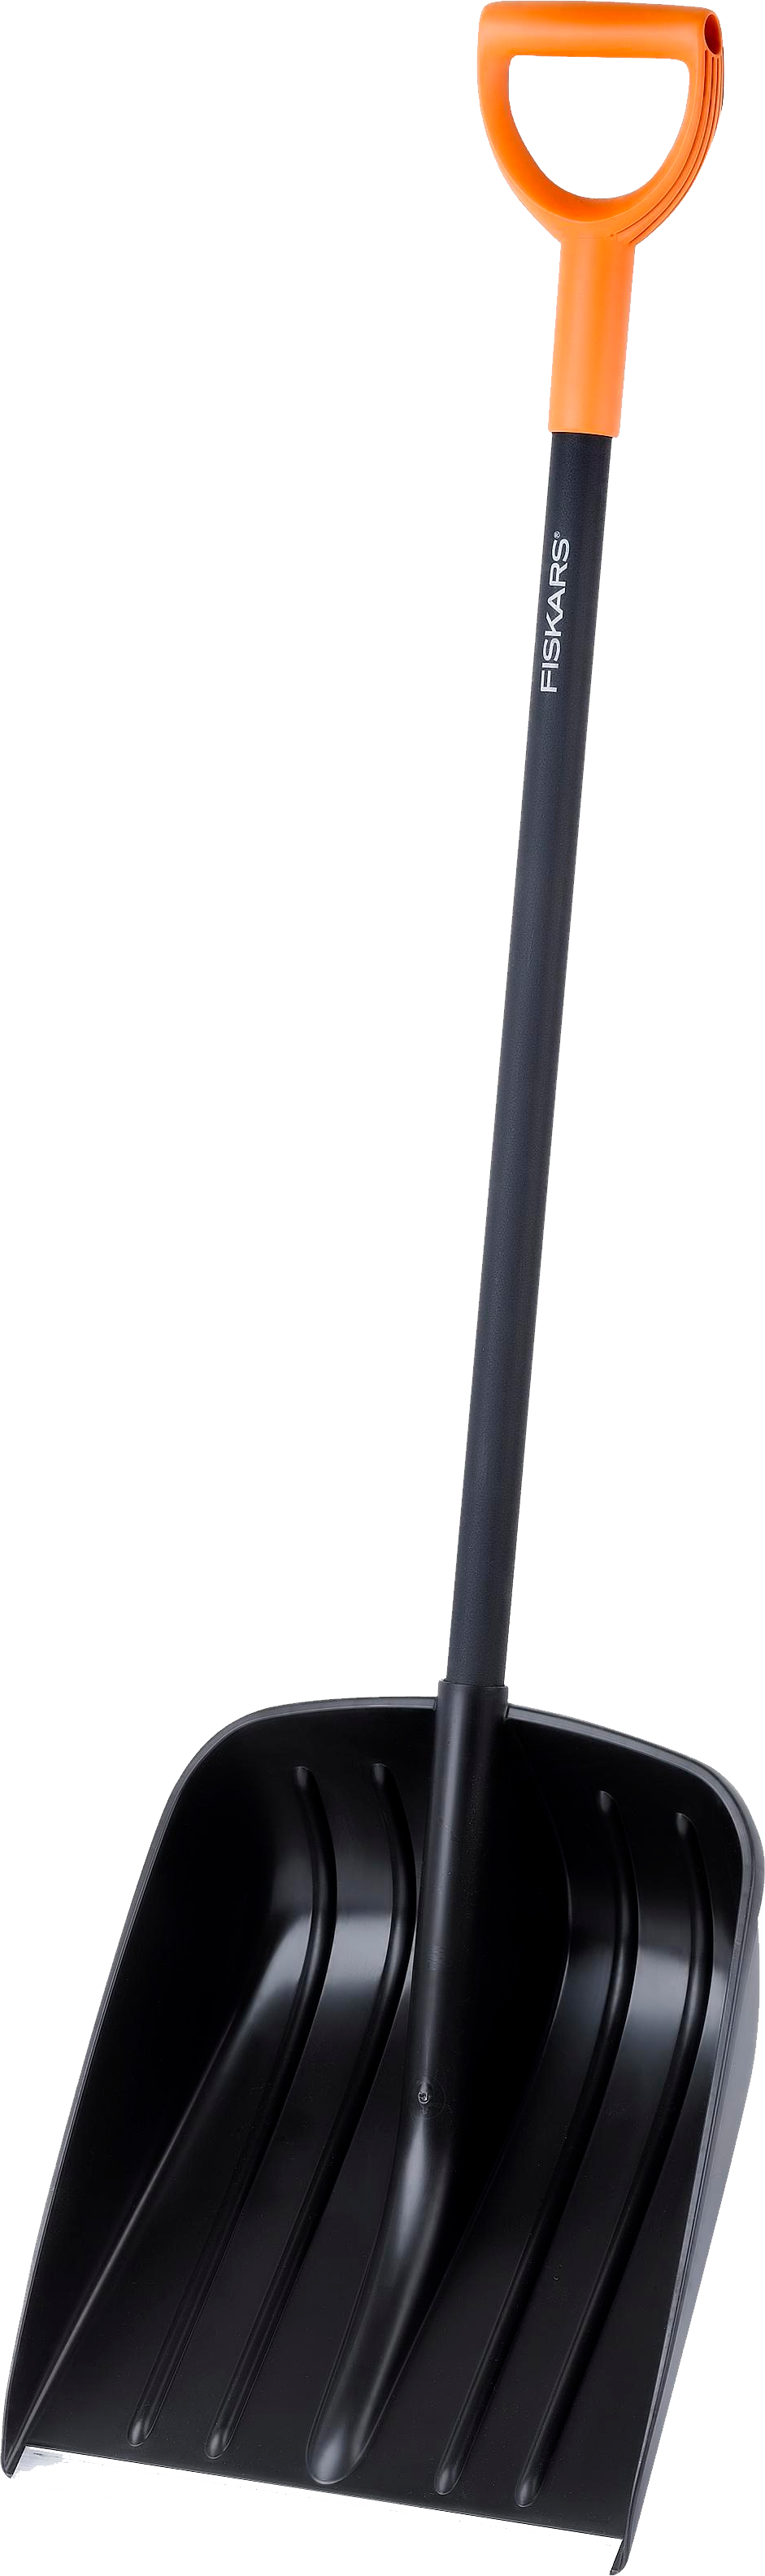 A Long Black Pole With A Black Background